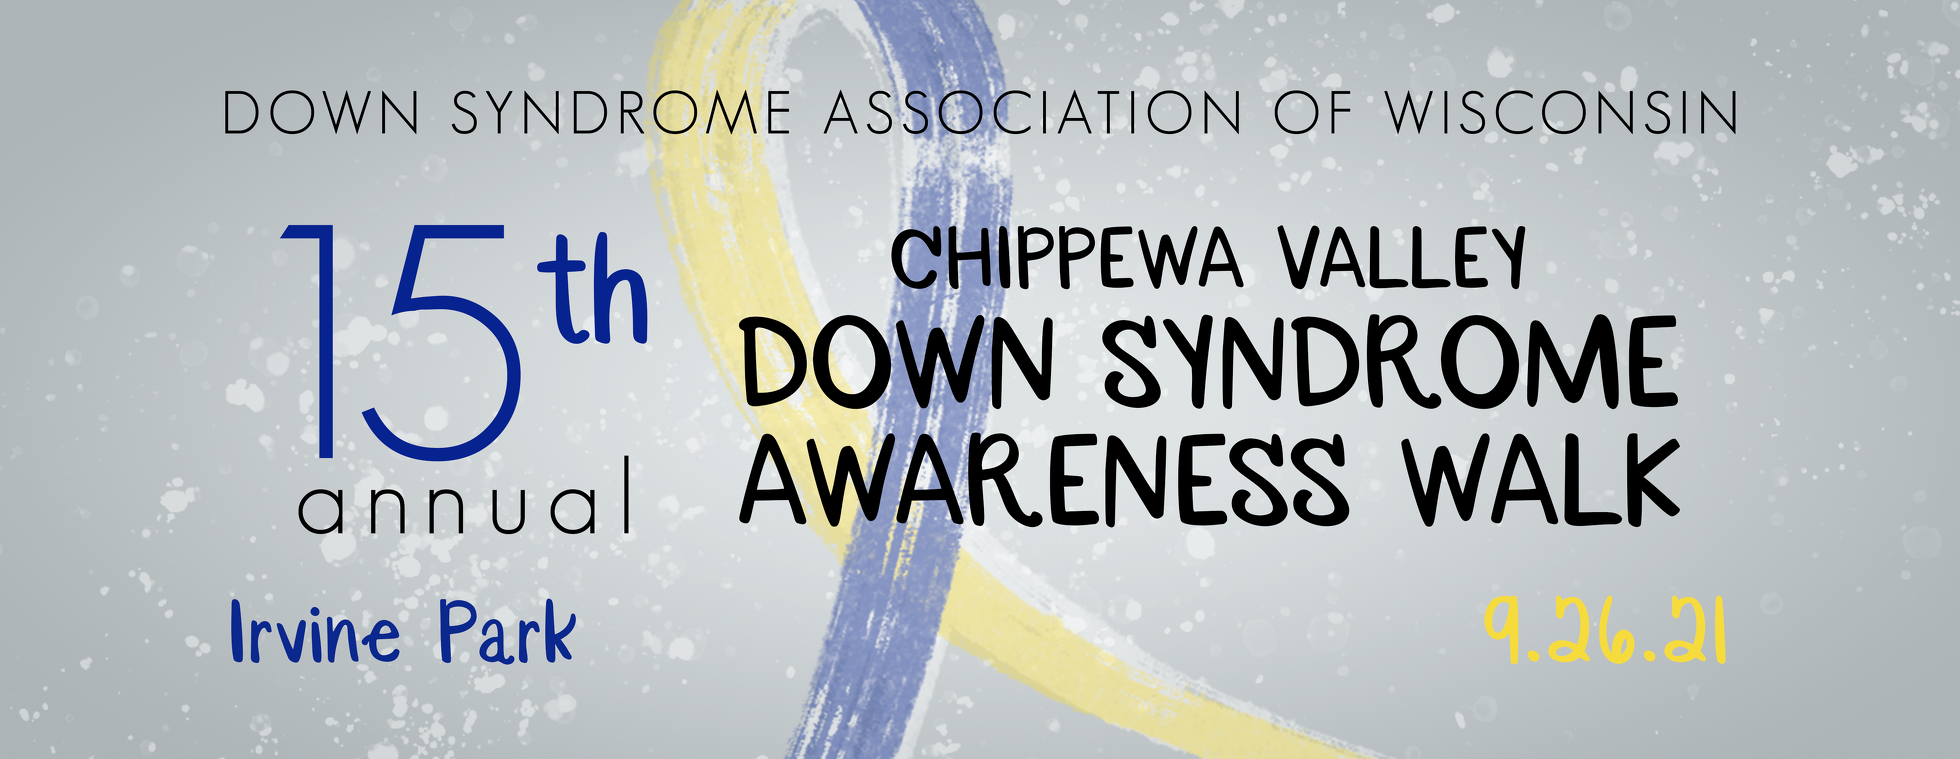 15th Annual DSAW-Chippewa Valley Down Syndrome Awareness Walk